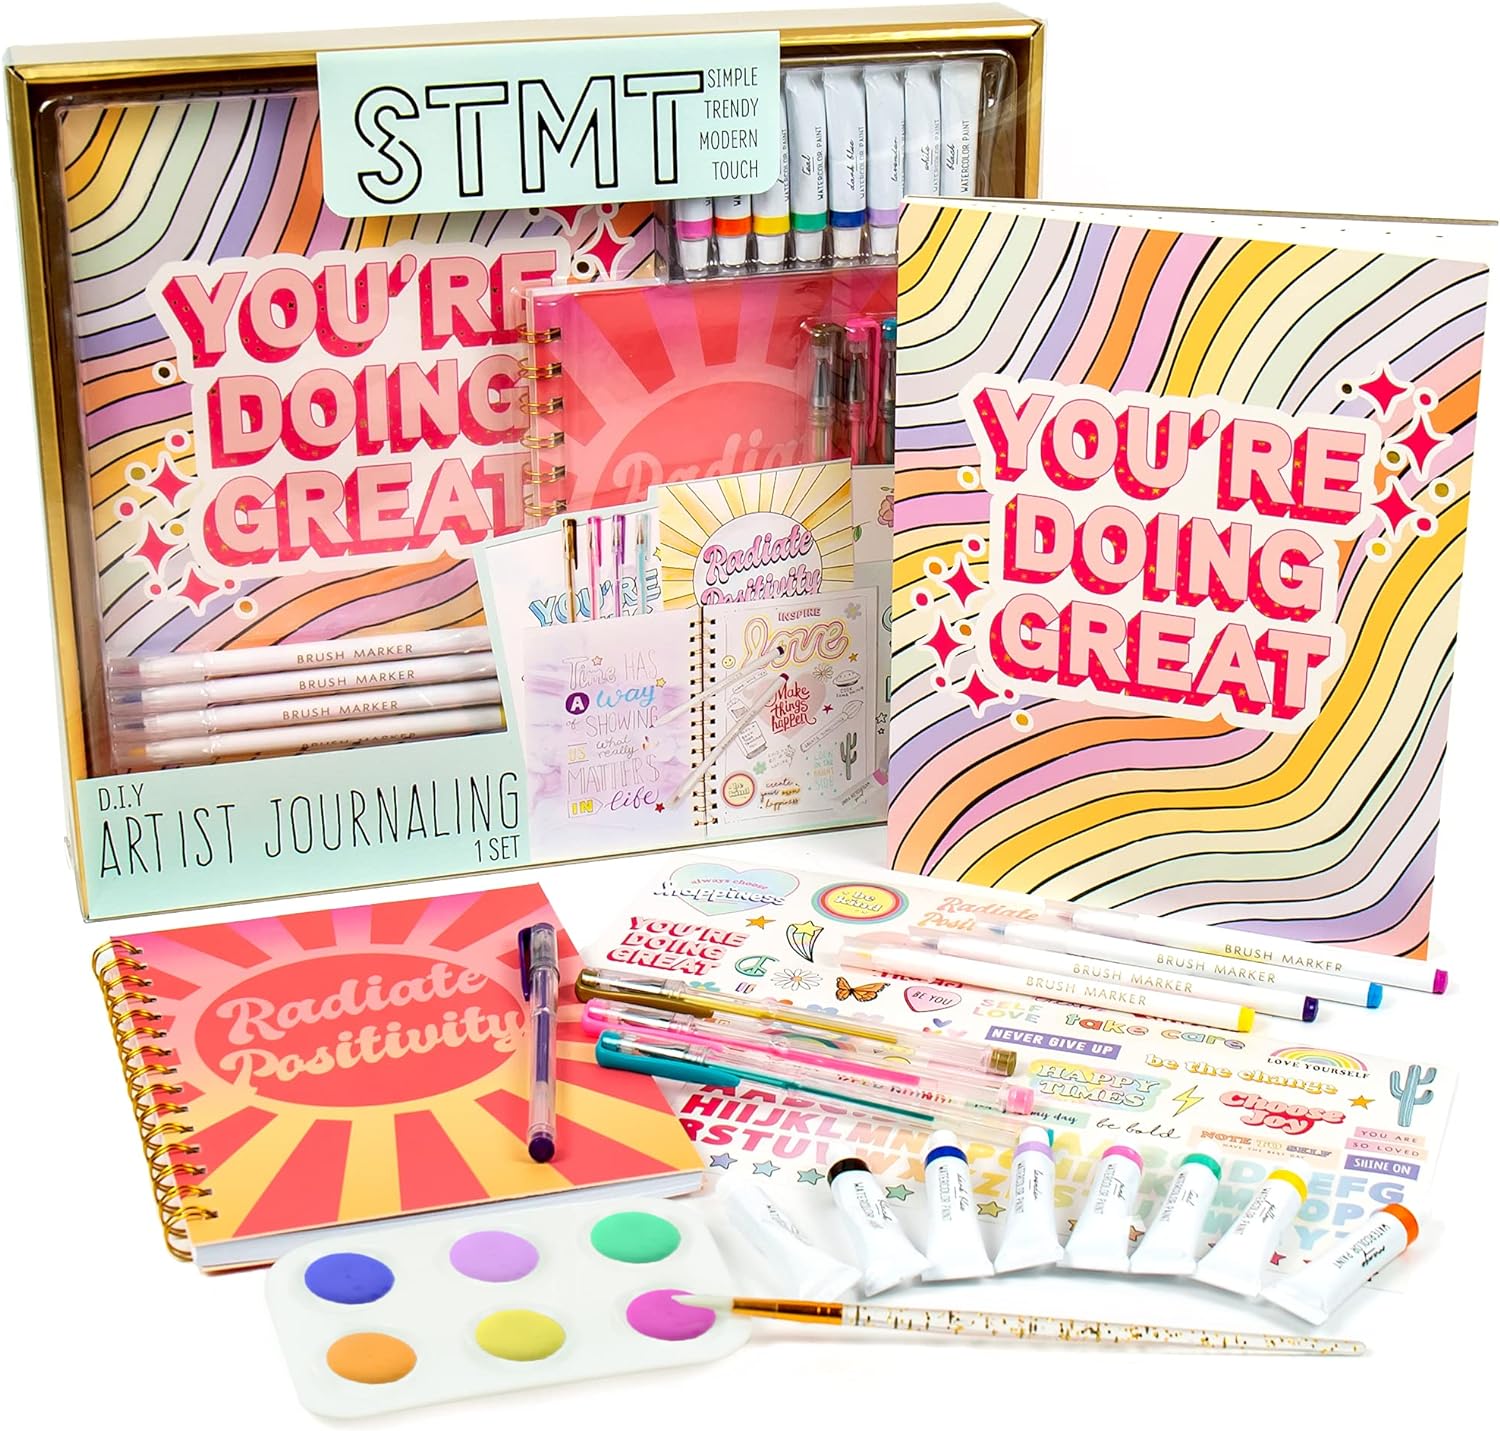 Bought this as a gift so beyond the initial packaging I cant comment, I can say though that the entire set looks so cute and fun. Definitely worth the money, perfect size and not a bunch of clutter. Beginning journalers will enjoy.